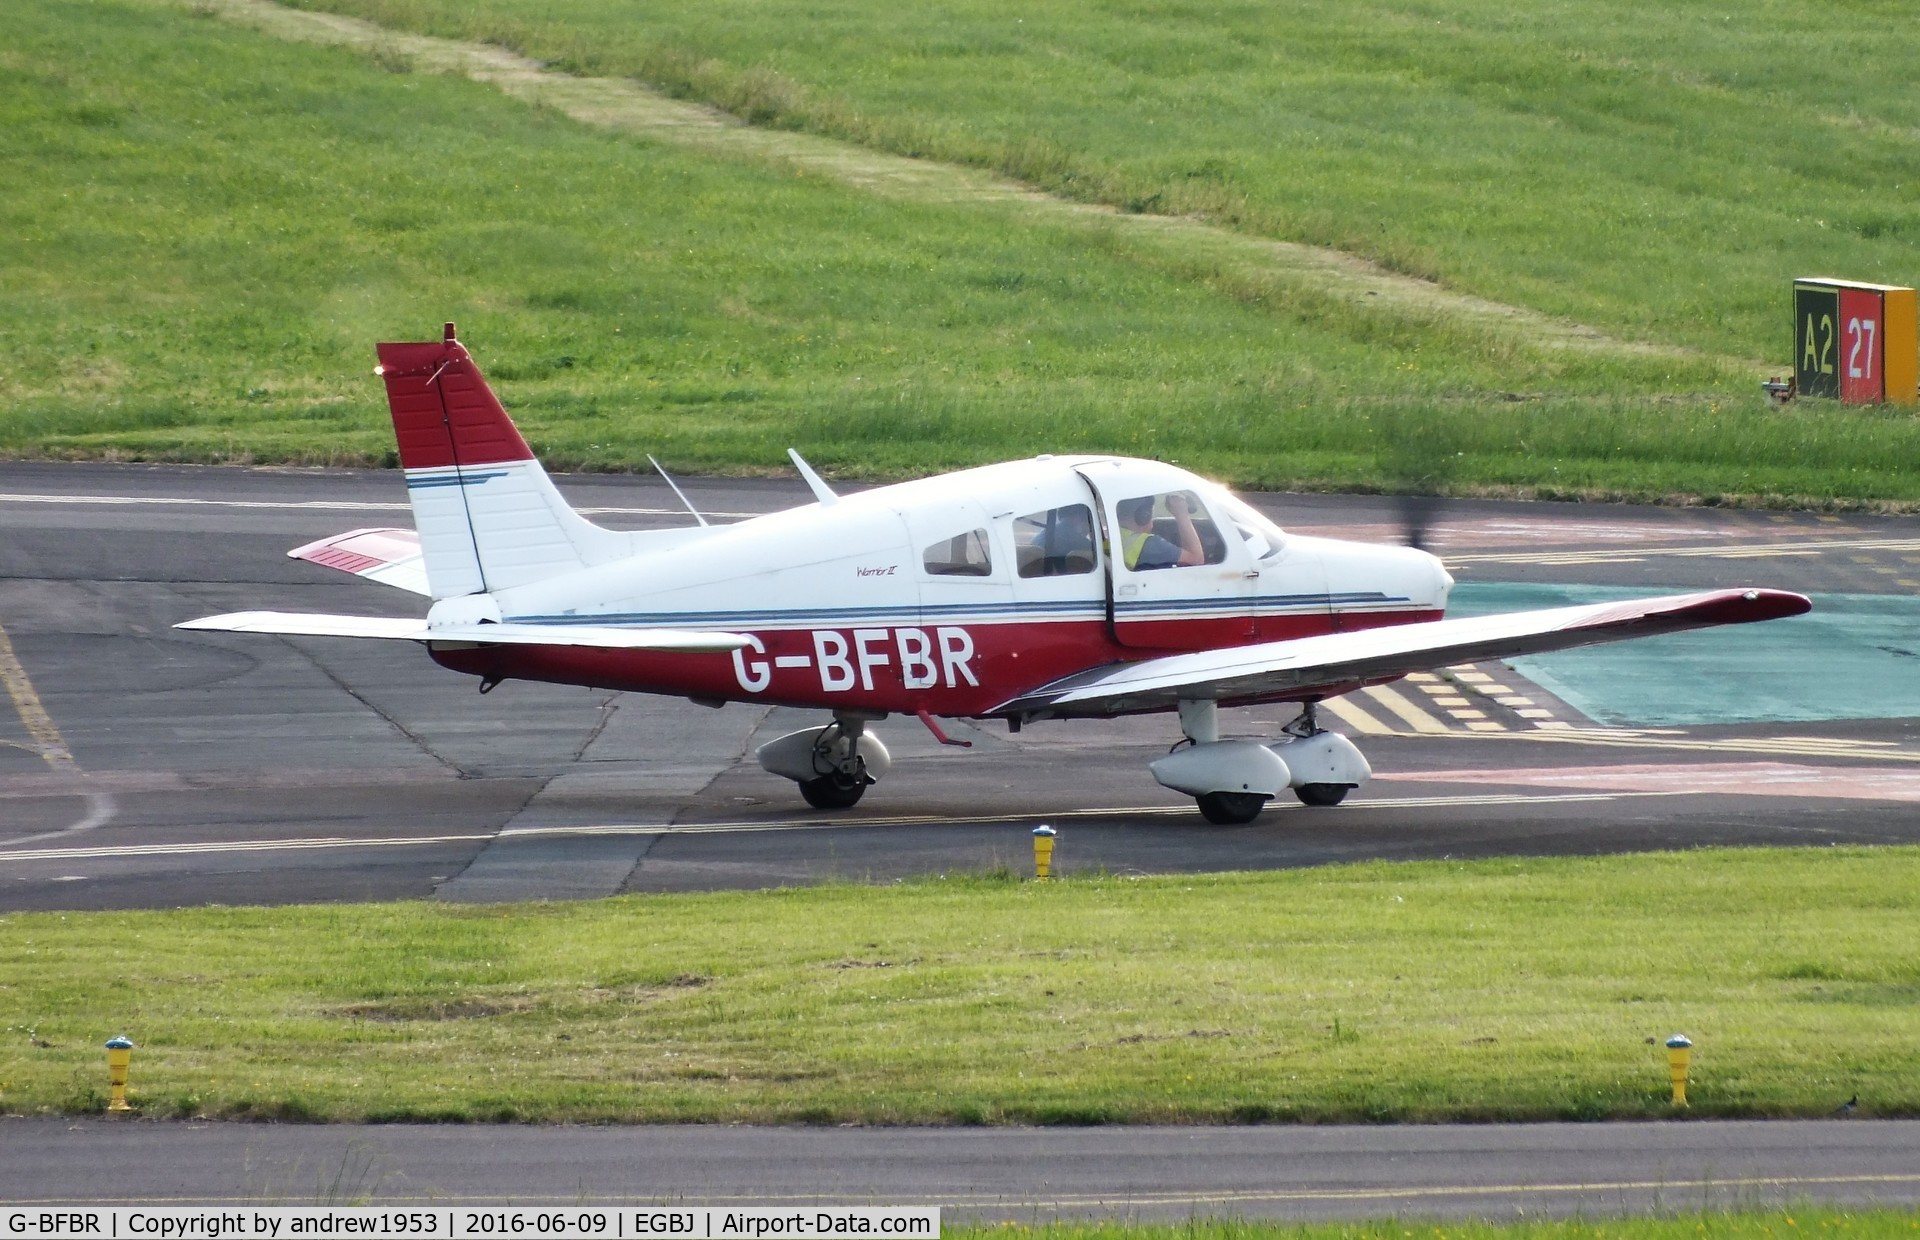 G-BFBR, 1977 Piper PA-28-161 Cherokee Warrior II C/N 28-7716277, G-BFBR at Gloucestershire Airport.